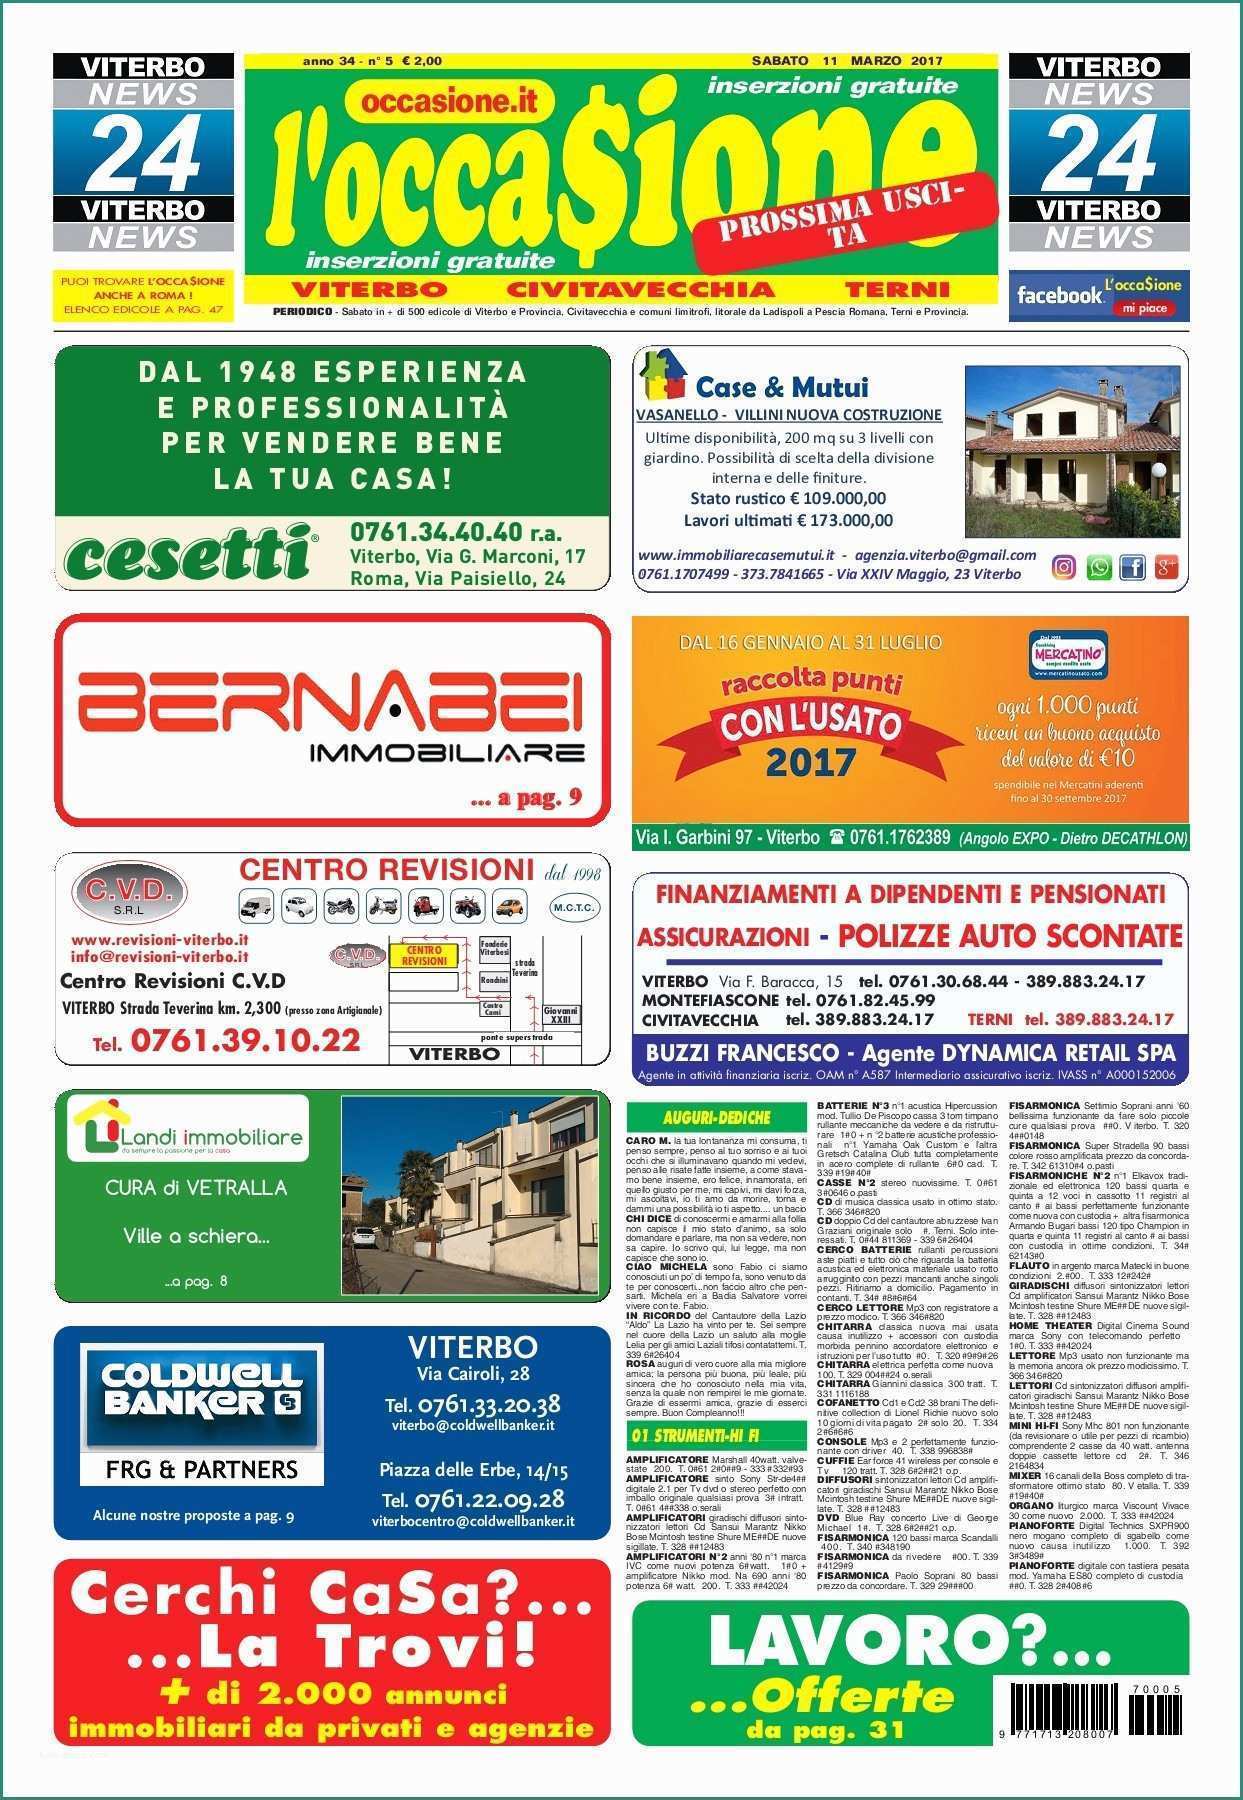 Albano Shop Online E L Occa$ione N 5 11 25 Marzo Pages 1 48 Text Version